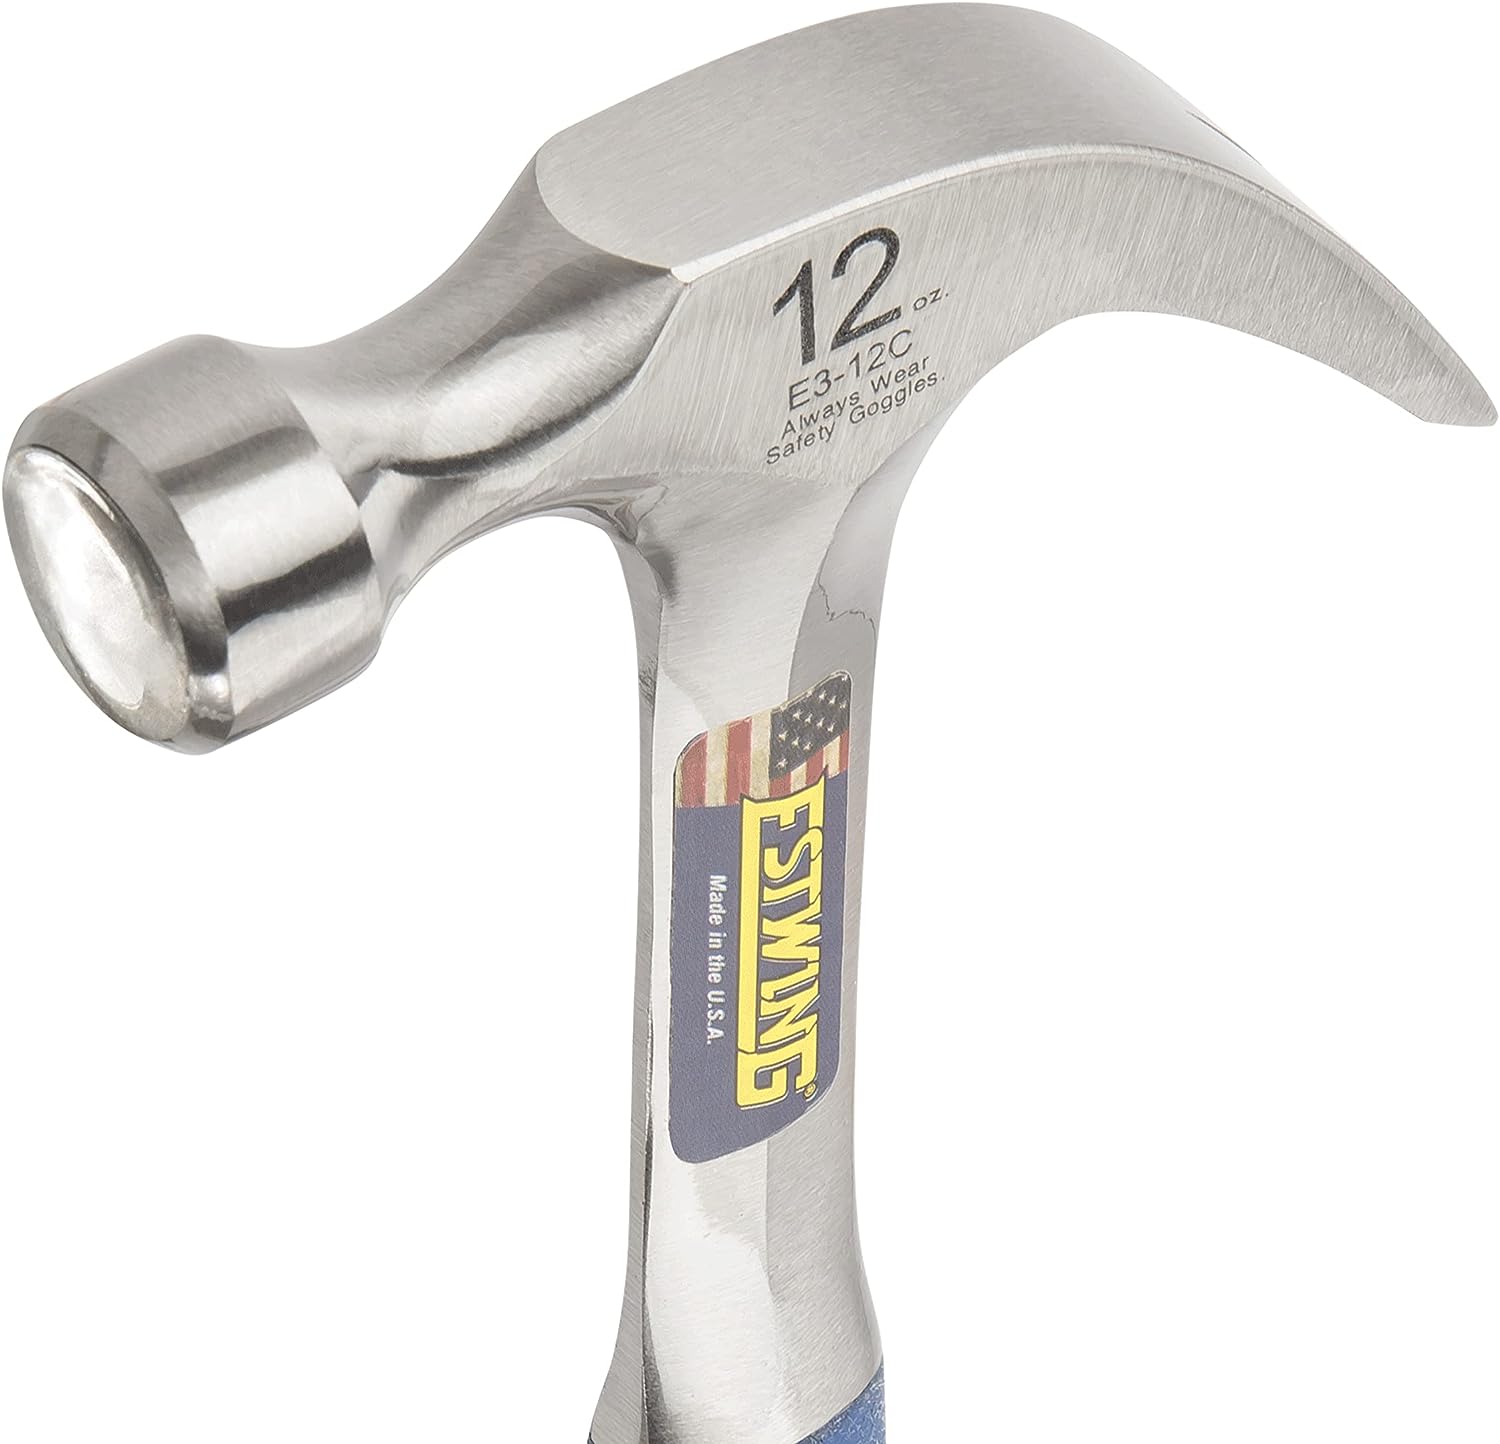 ESTWING Hammer - 12 oz Curved Claw with Smooth Face & Shock